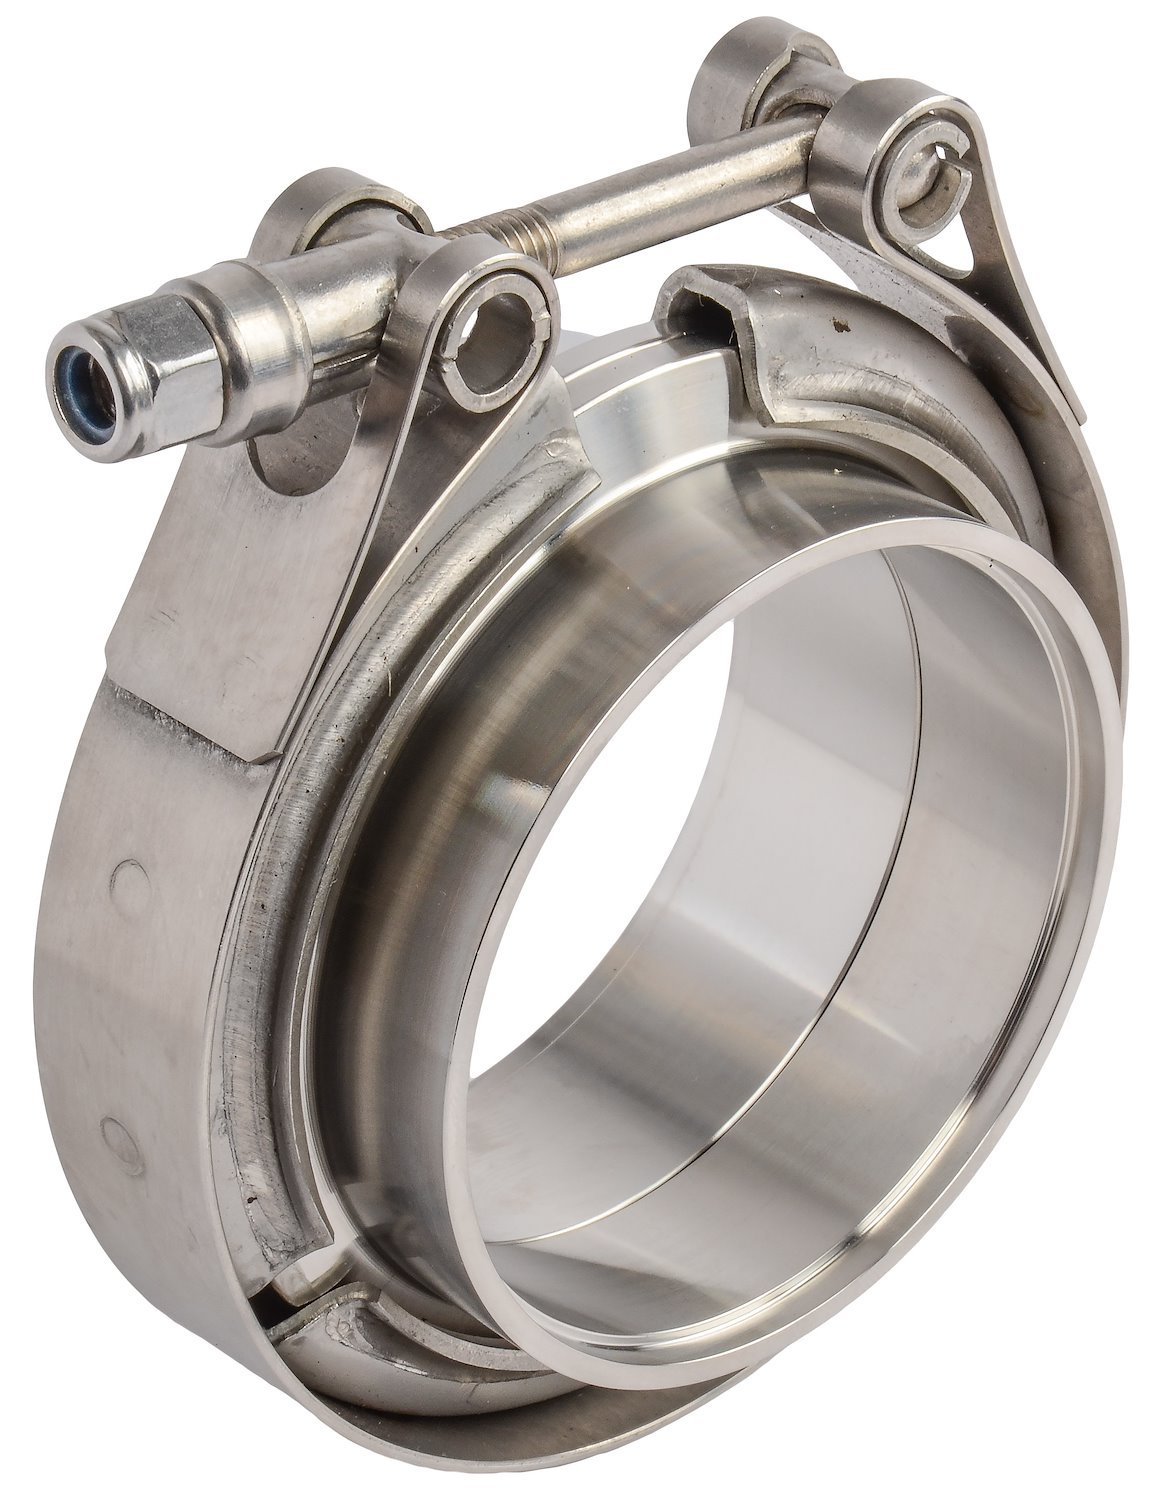 Universal Use for 3 Outer Diameter Tube 3.0 Inches ID Stainless Steel V-Band Clamp with Aluminum Flange Kit 10 mm Lock Bolt 